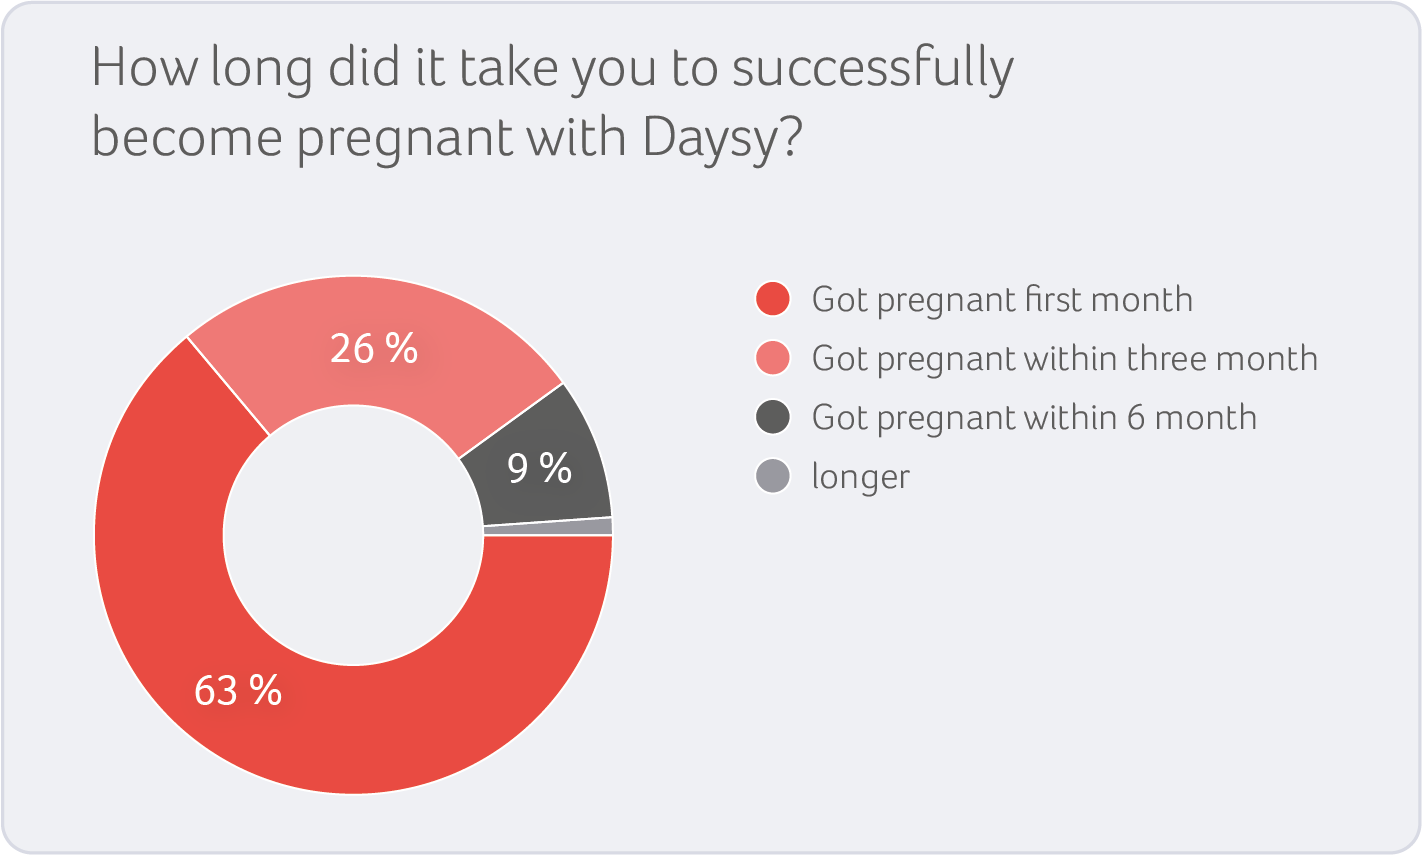 Getting successfully pregnant with Daysy